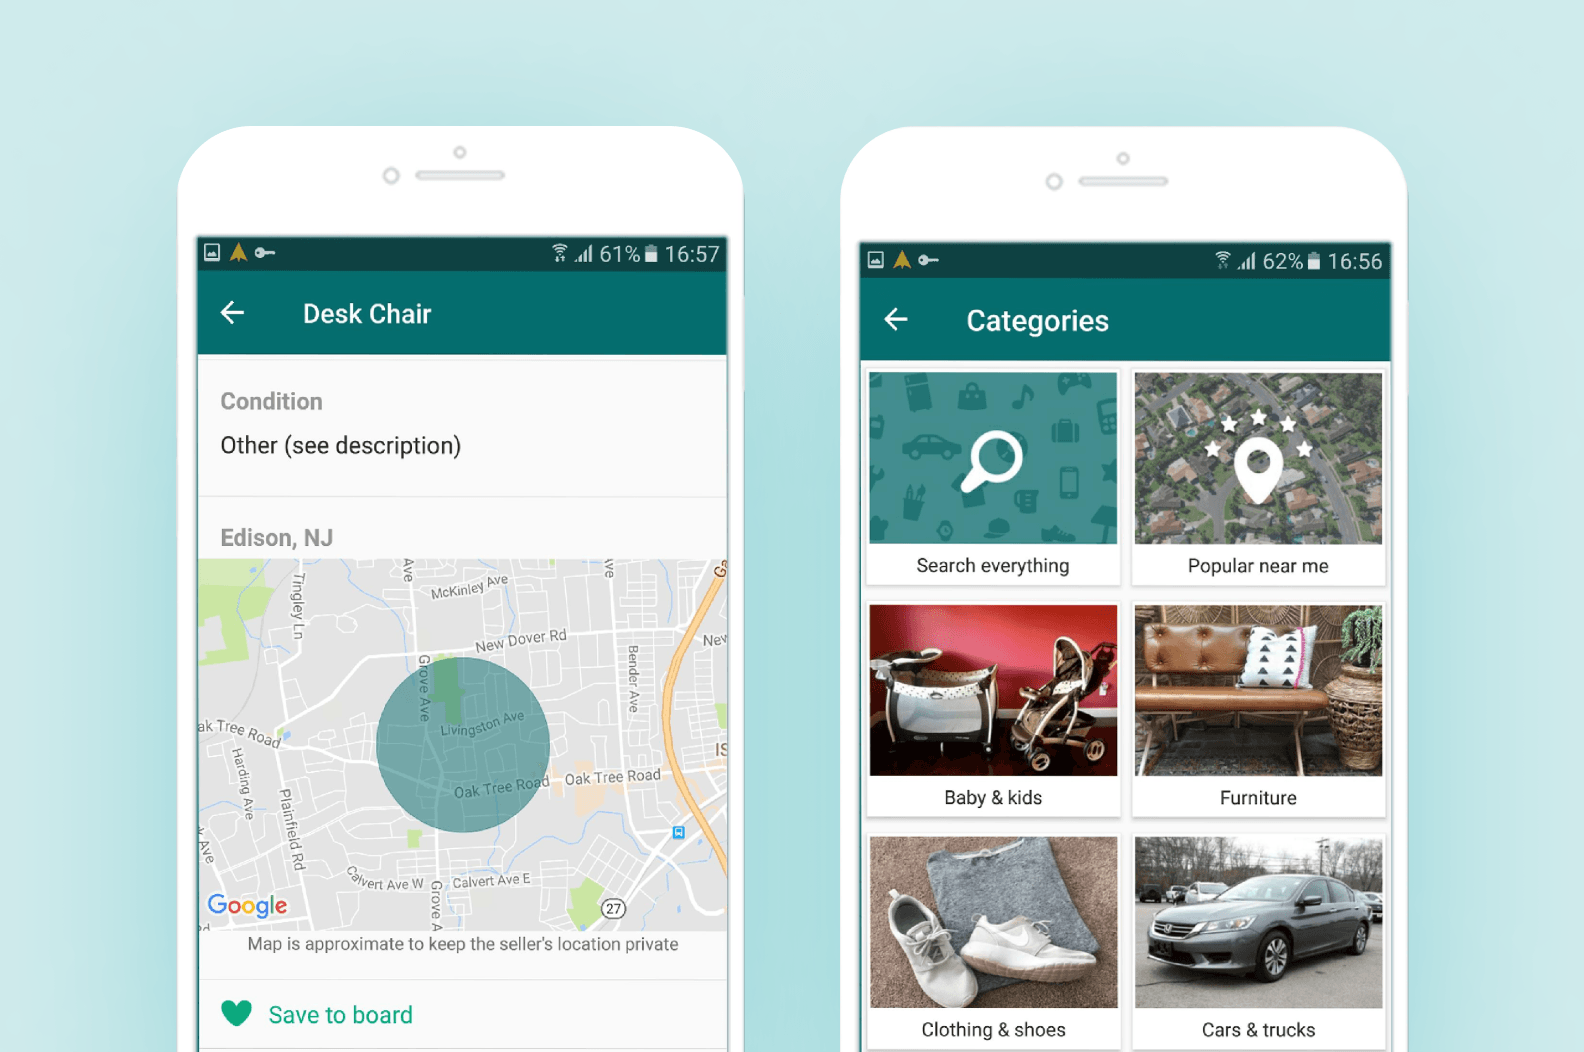 OfferUp’s interface with pictures of goods and a map